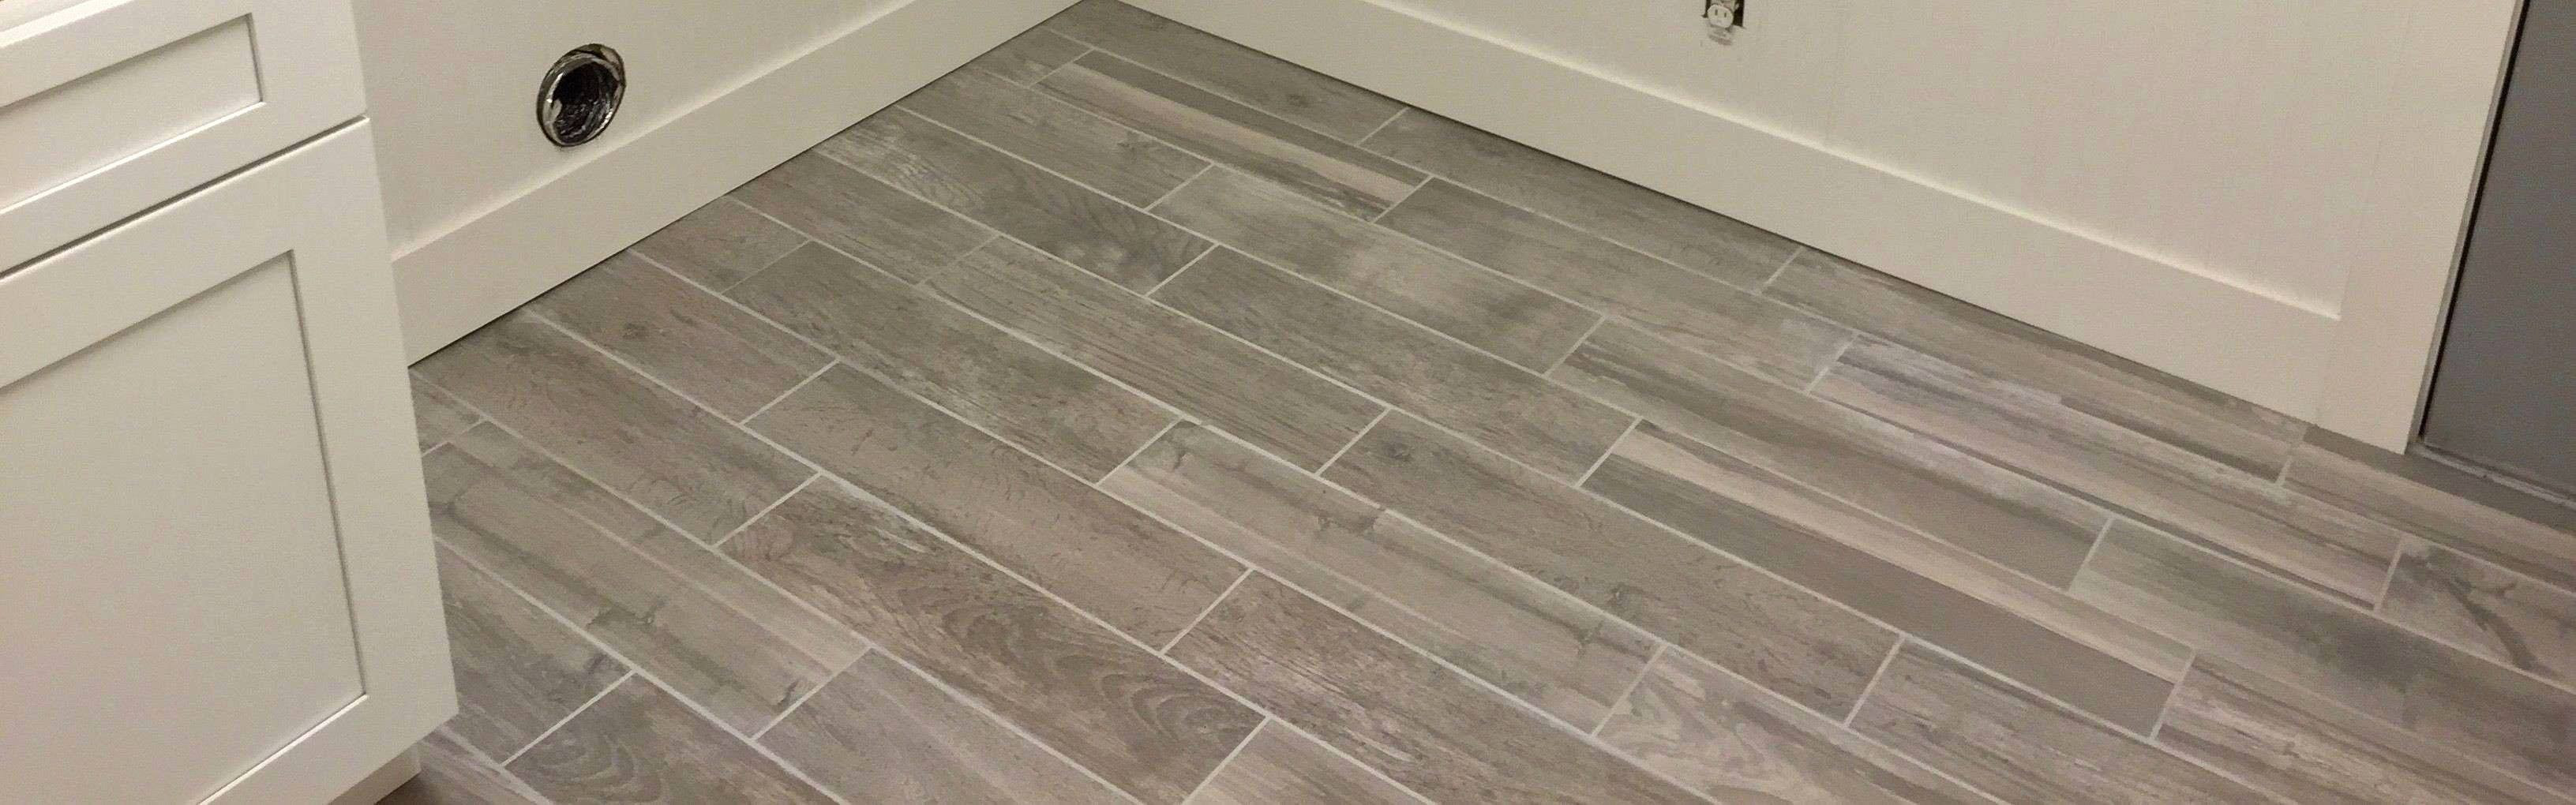 26 Cute Cost to Replace Section Of Hardwood Floor 2024 free download cost to replace section of hardwood floor of fantastic cost to replace tile floor in bathroom nice bathroom ideas inside cost to replace tile floor in bathroom astounding the ceramic tile vs